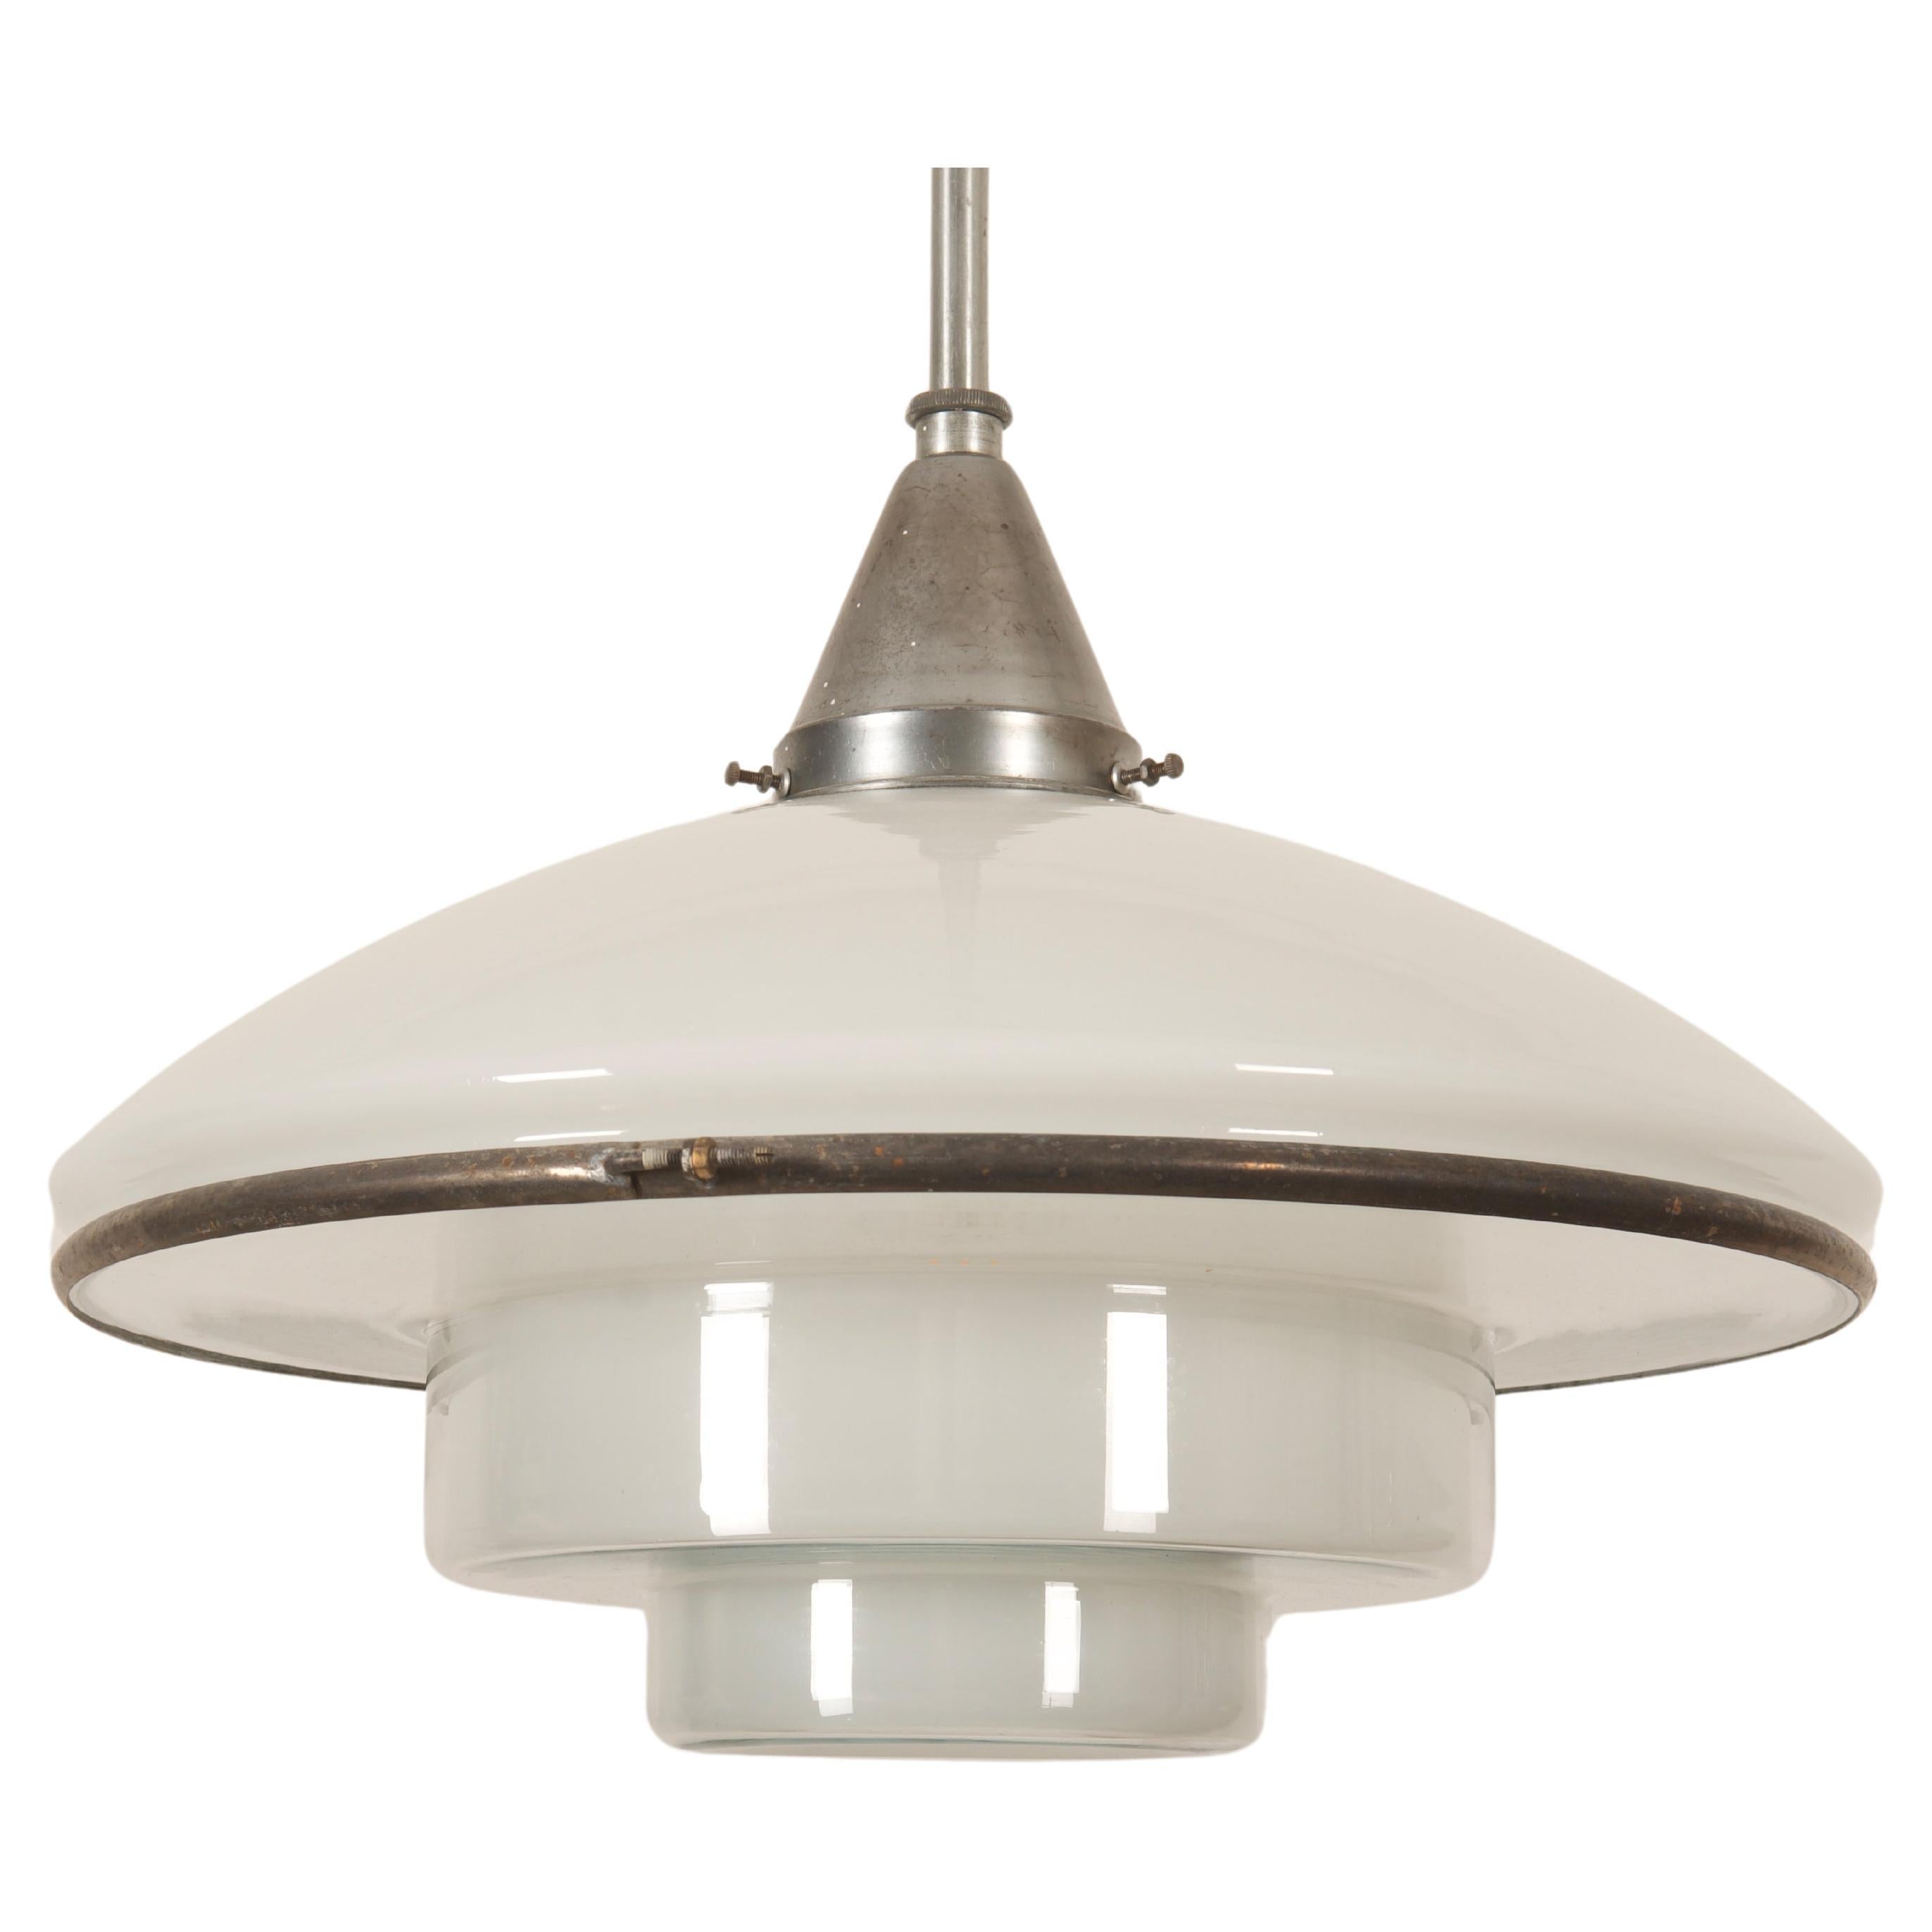 Sistrah P4 Pendant Lamp by Otto Müller For Sale